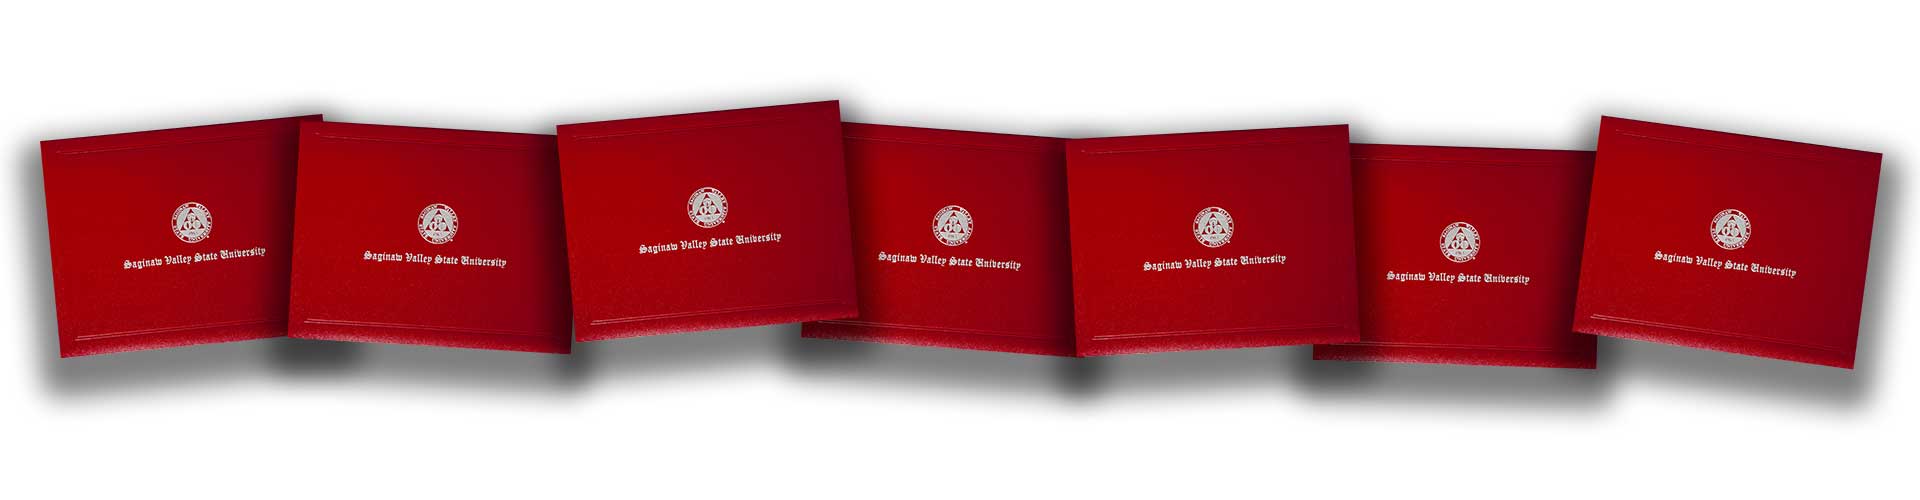 Diploma covers